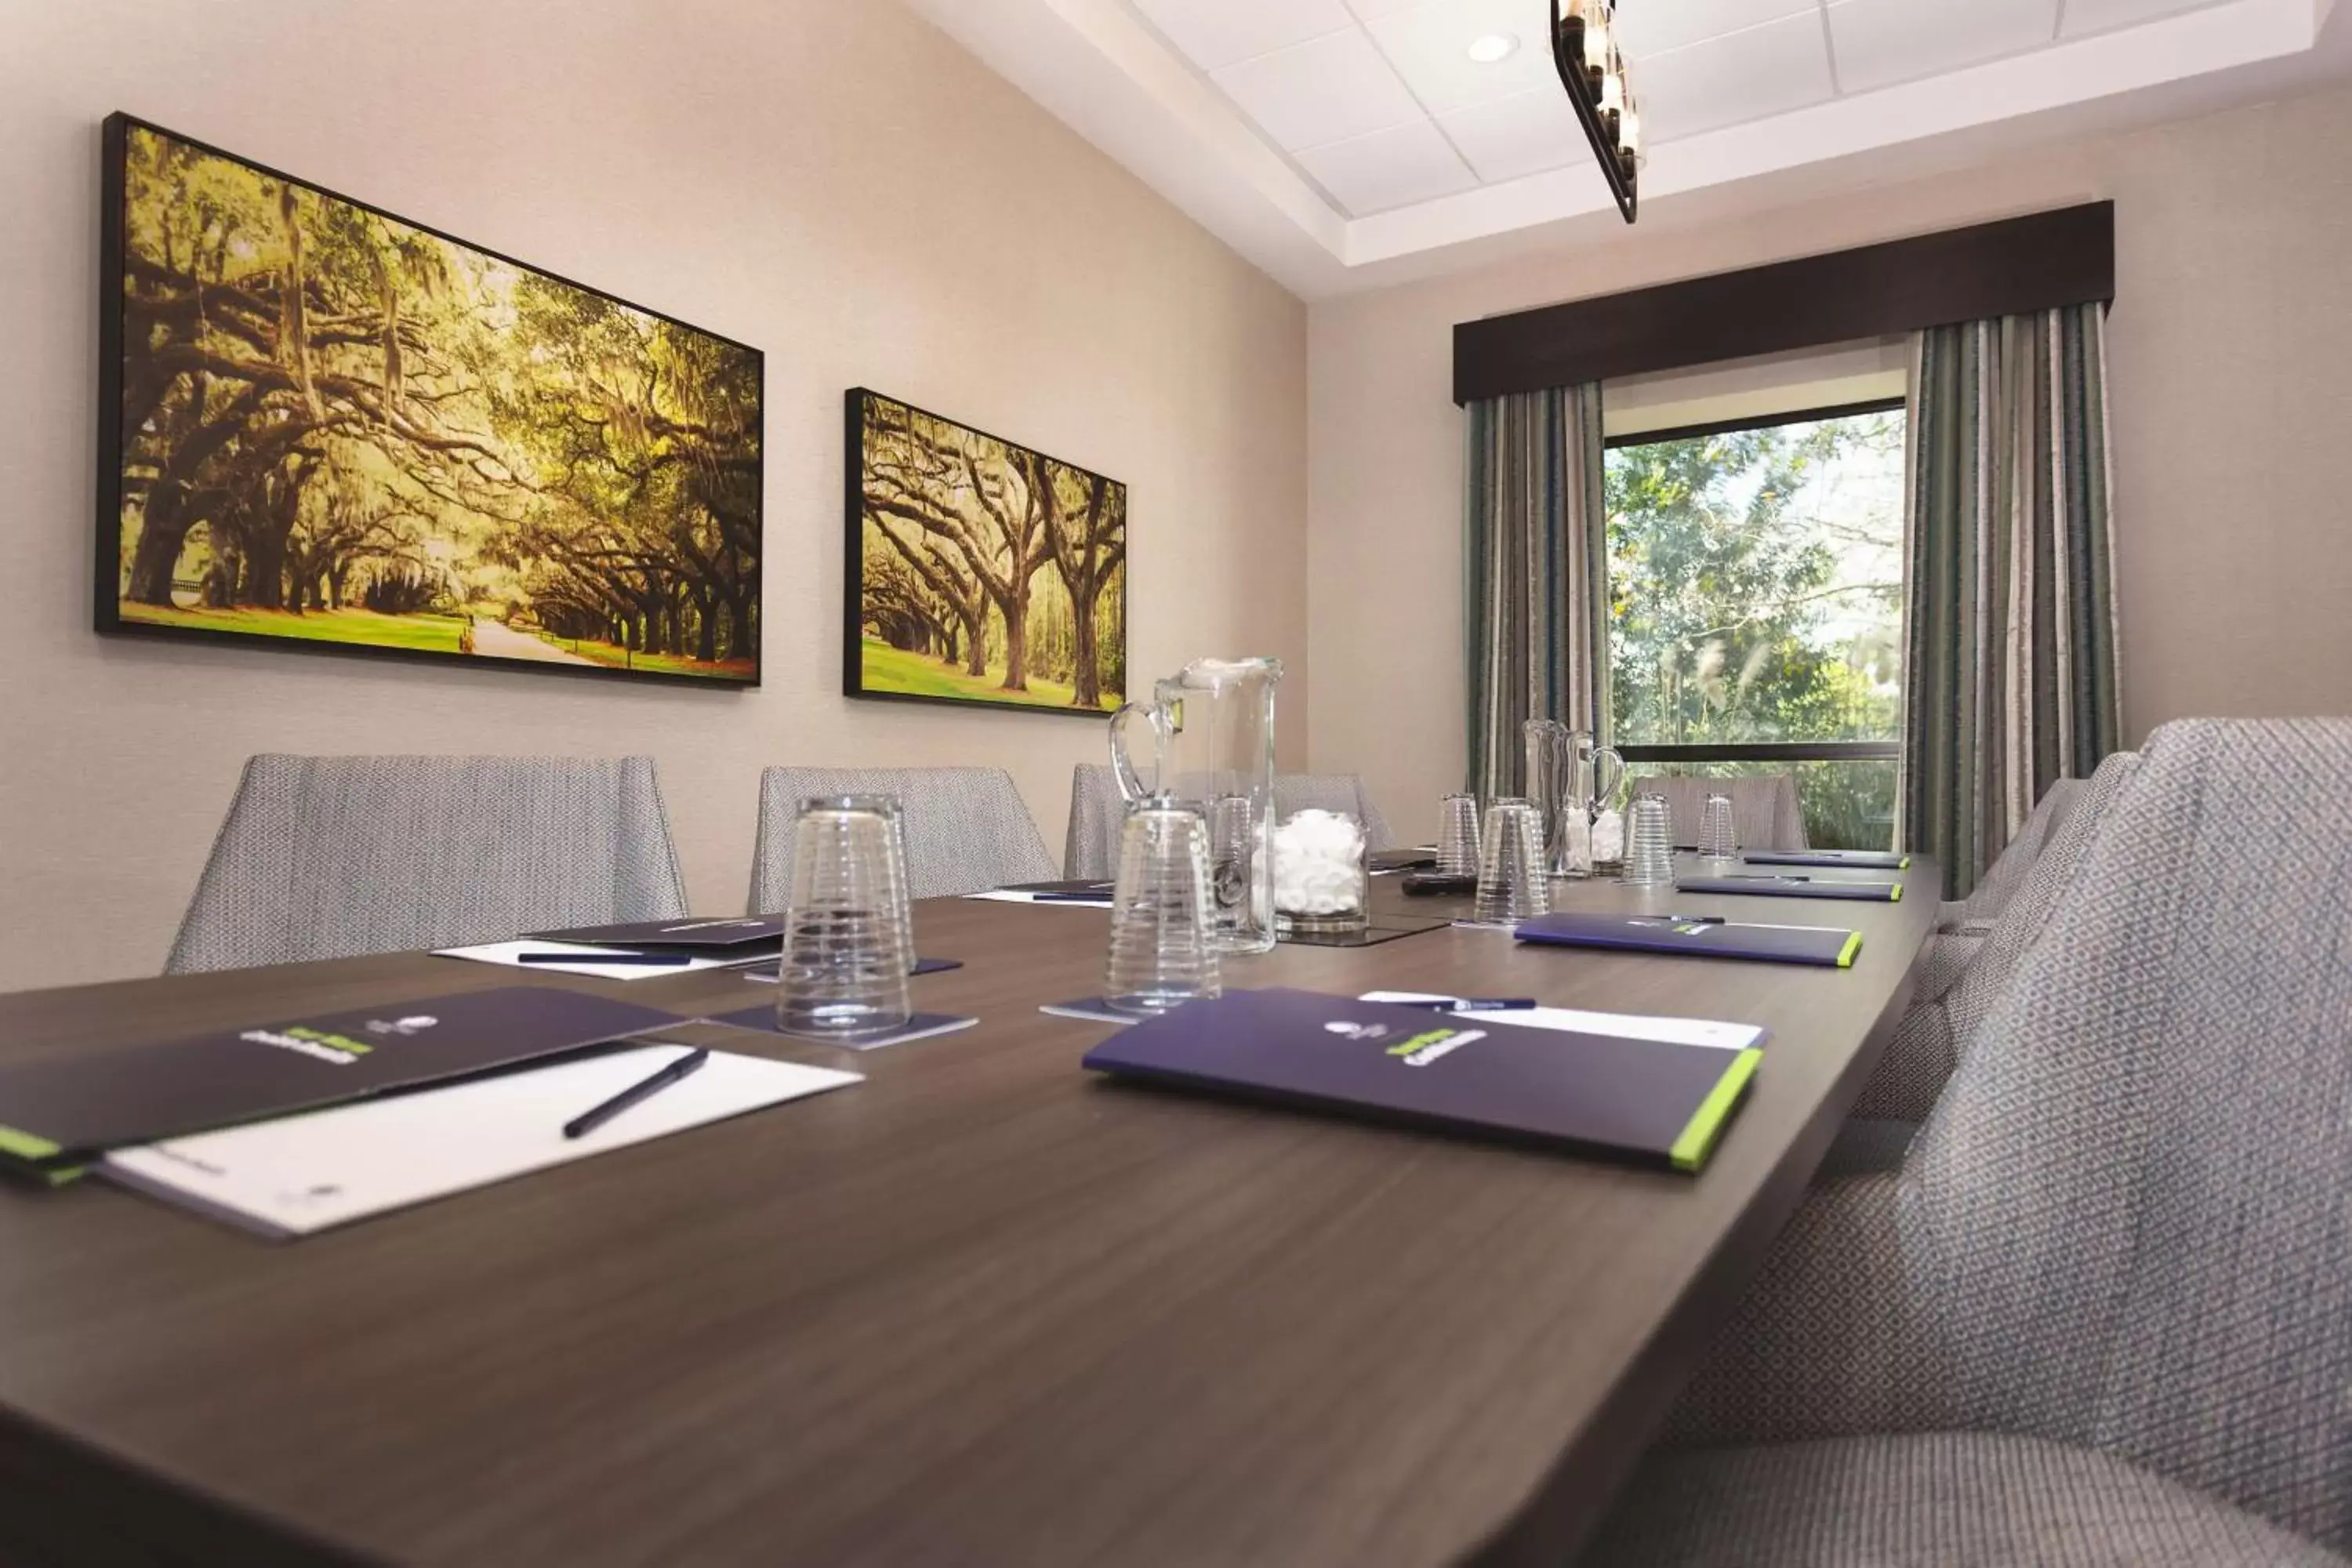 Meeting/conference room in DoubleTree by Hilton Charleston Mount Pleasant